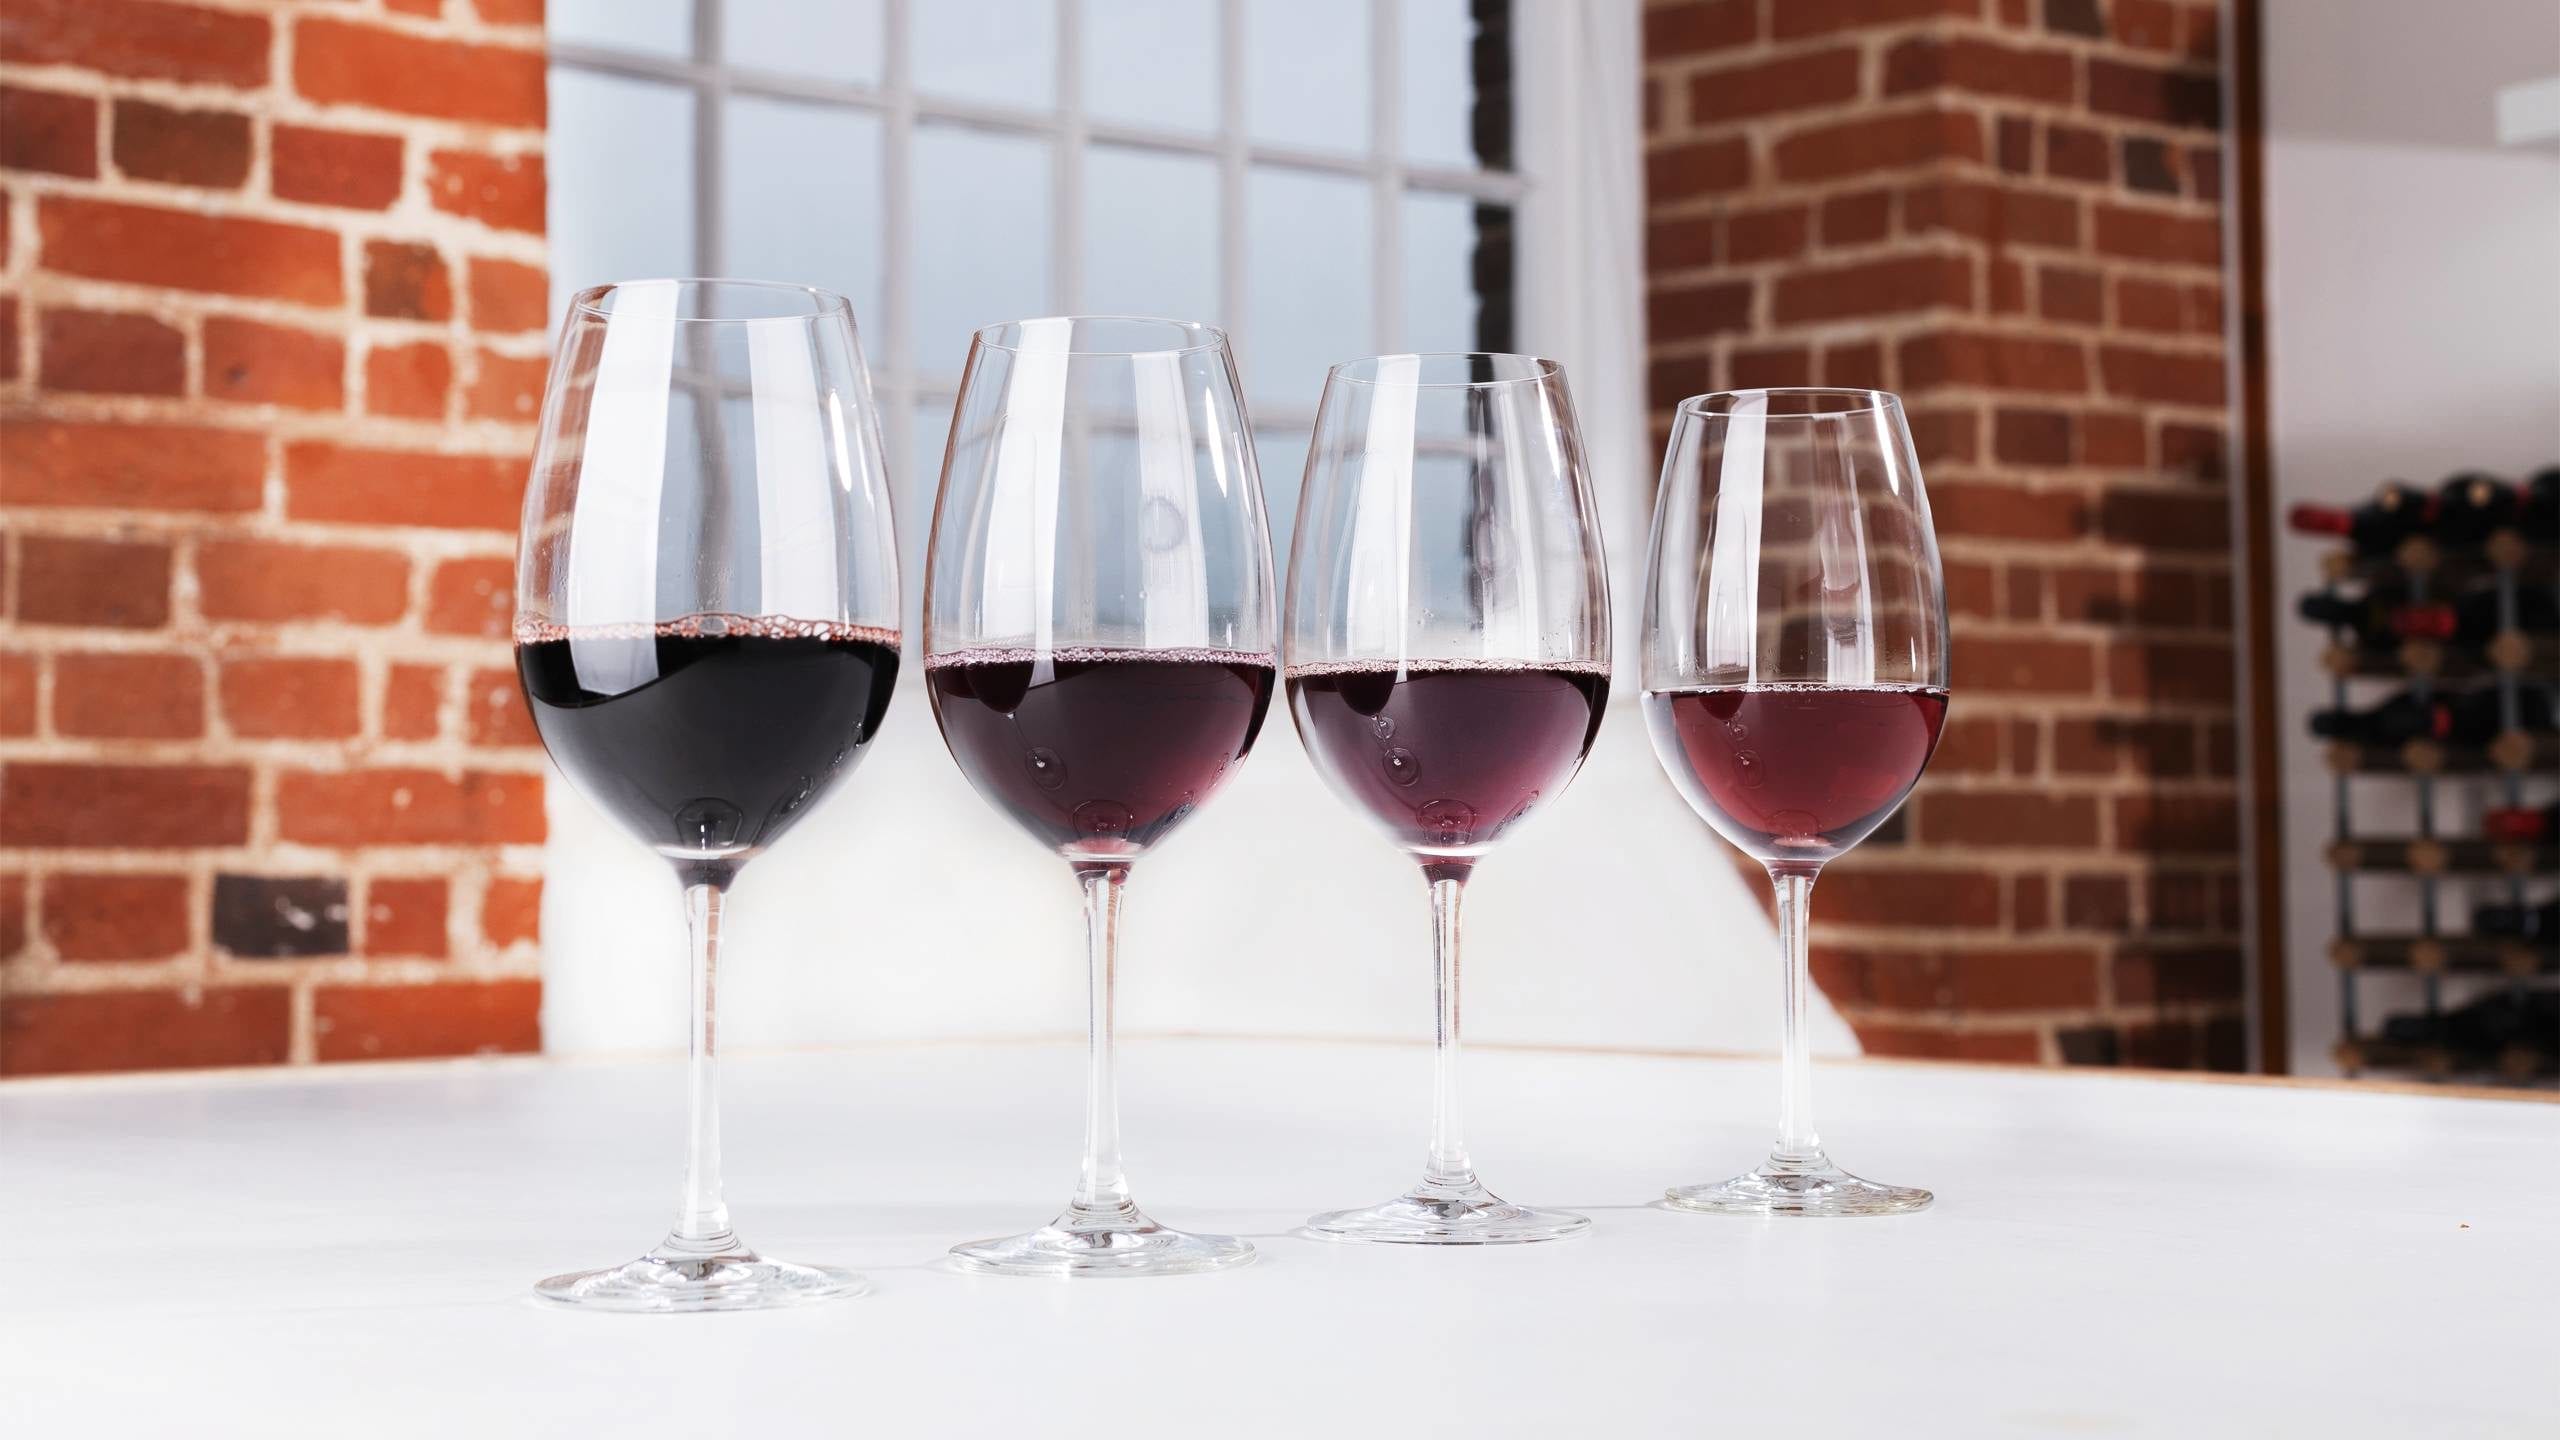 https://www.virginwines.co.uk/hub/wp-content/uploads/2021/06/Four-glasses-of-red-wine-on-a-table-in-front-of-a-window-and-brick-wall-2560x1440.jpg